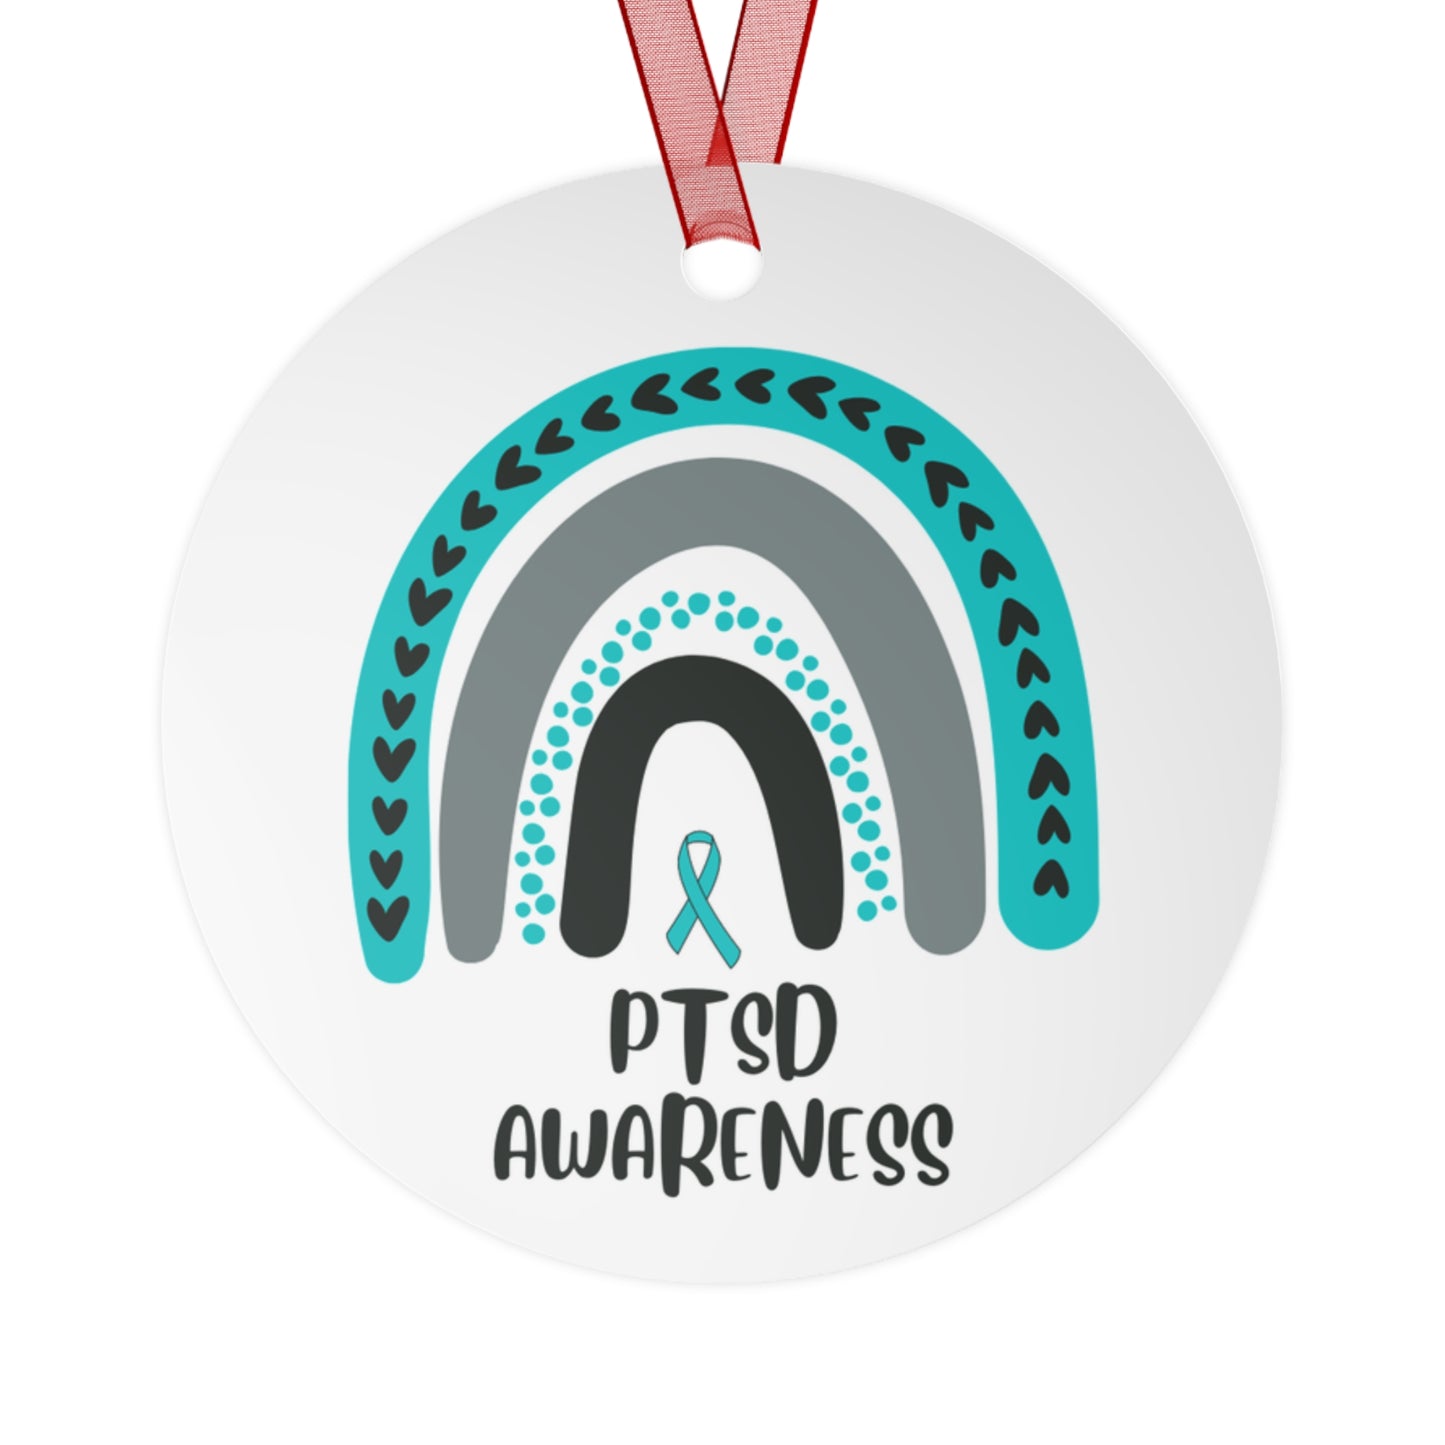 PTSD Awareness Christmas Ornament Stocking Stuffer Christmas Gift, Holiday Home Decor, Wall Hanging, Support for Friend